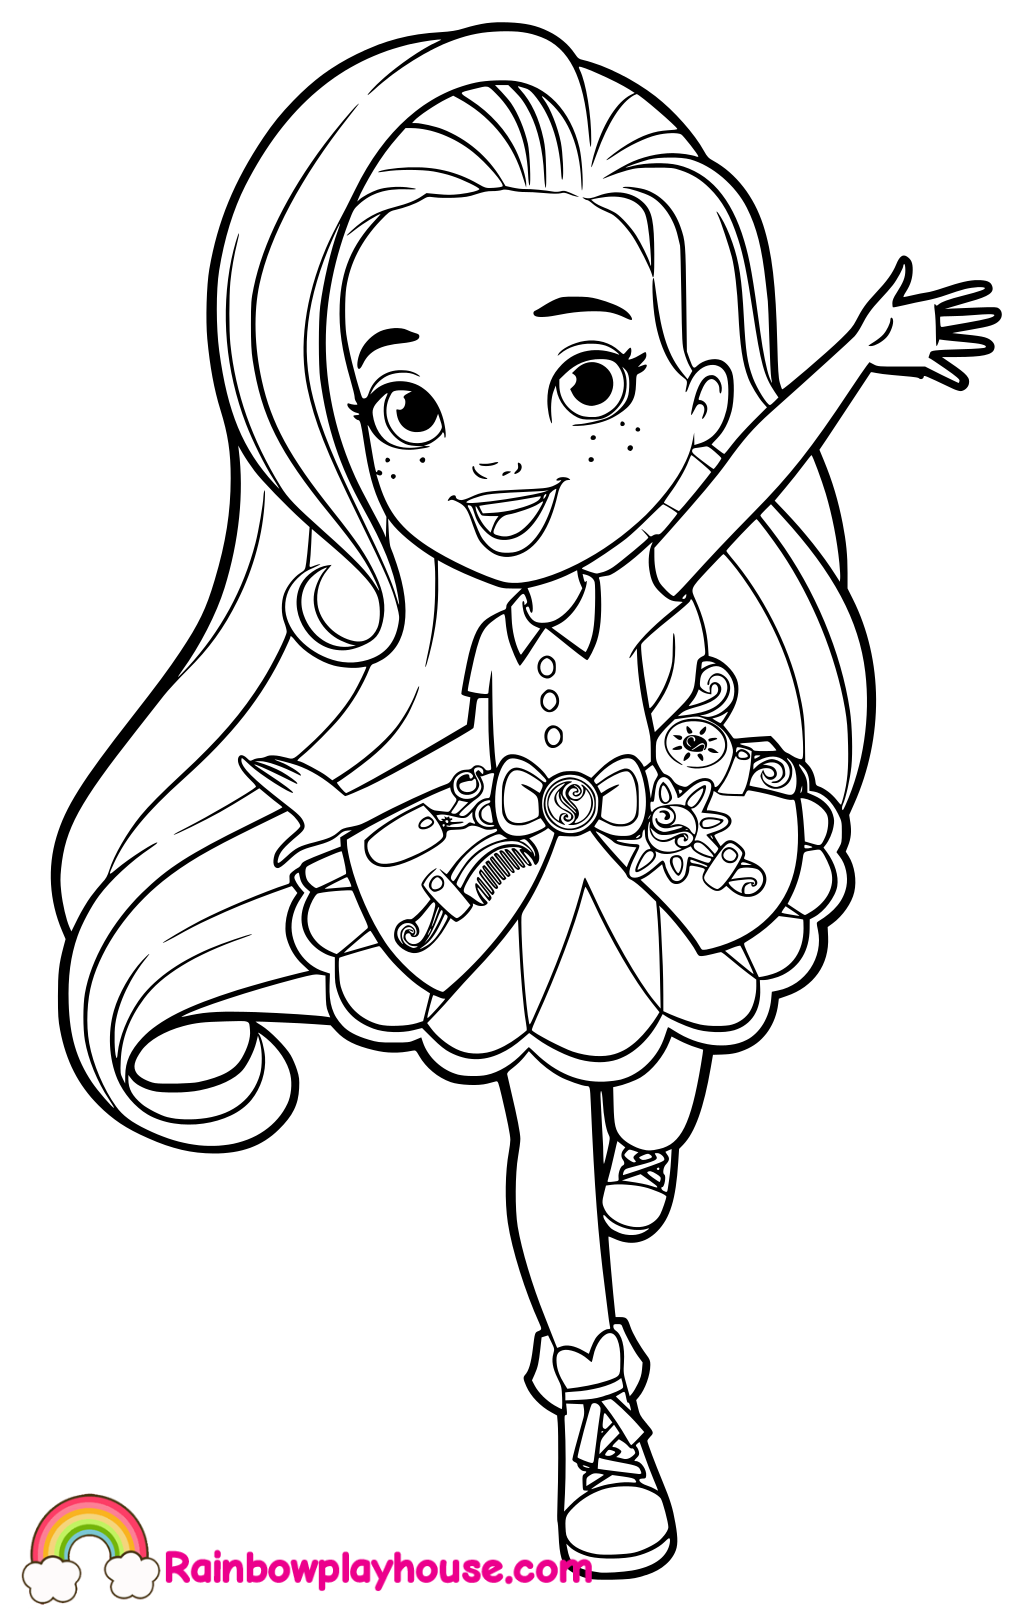 Sunny Day Coloring Pages at GetColorings.com | Free printable colorings ...